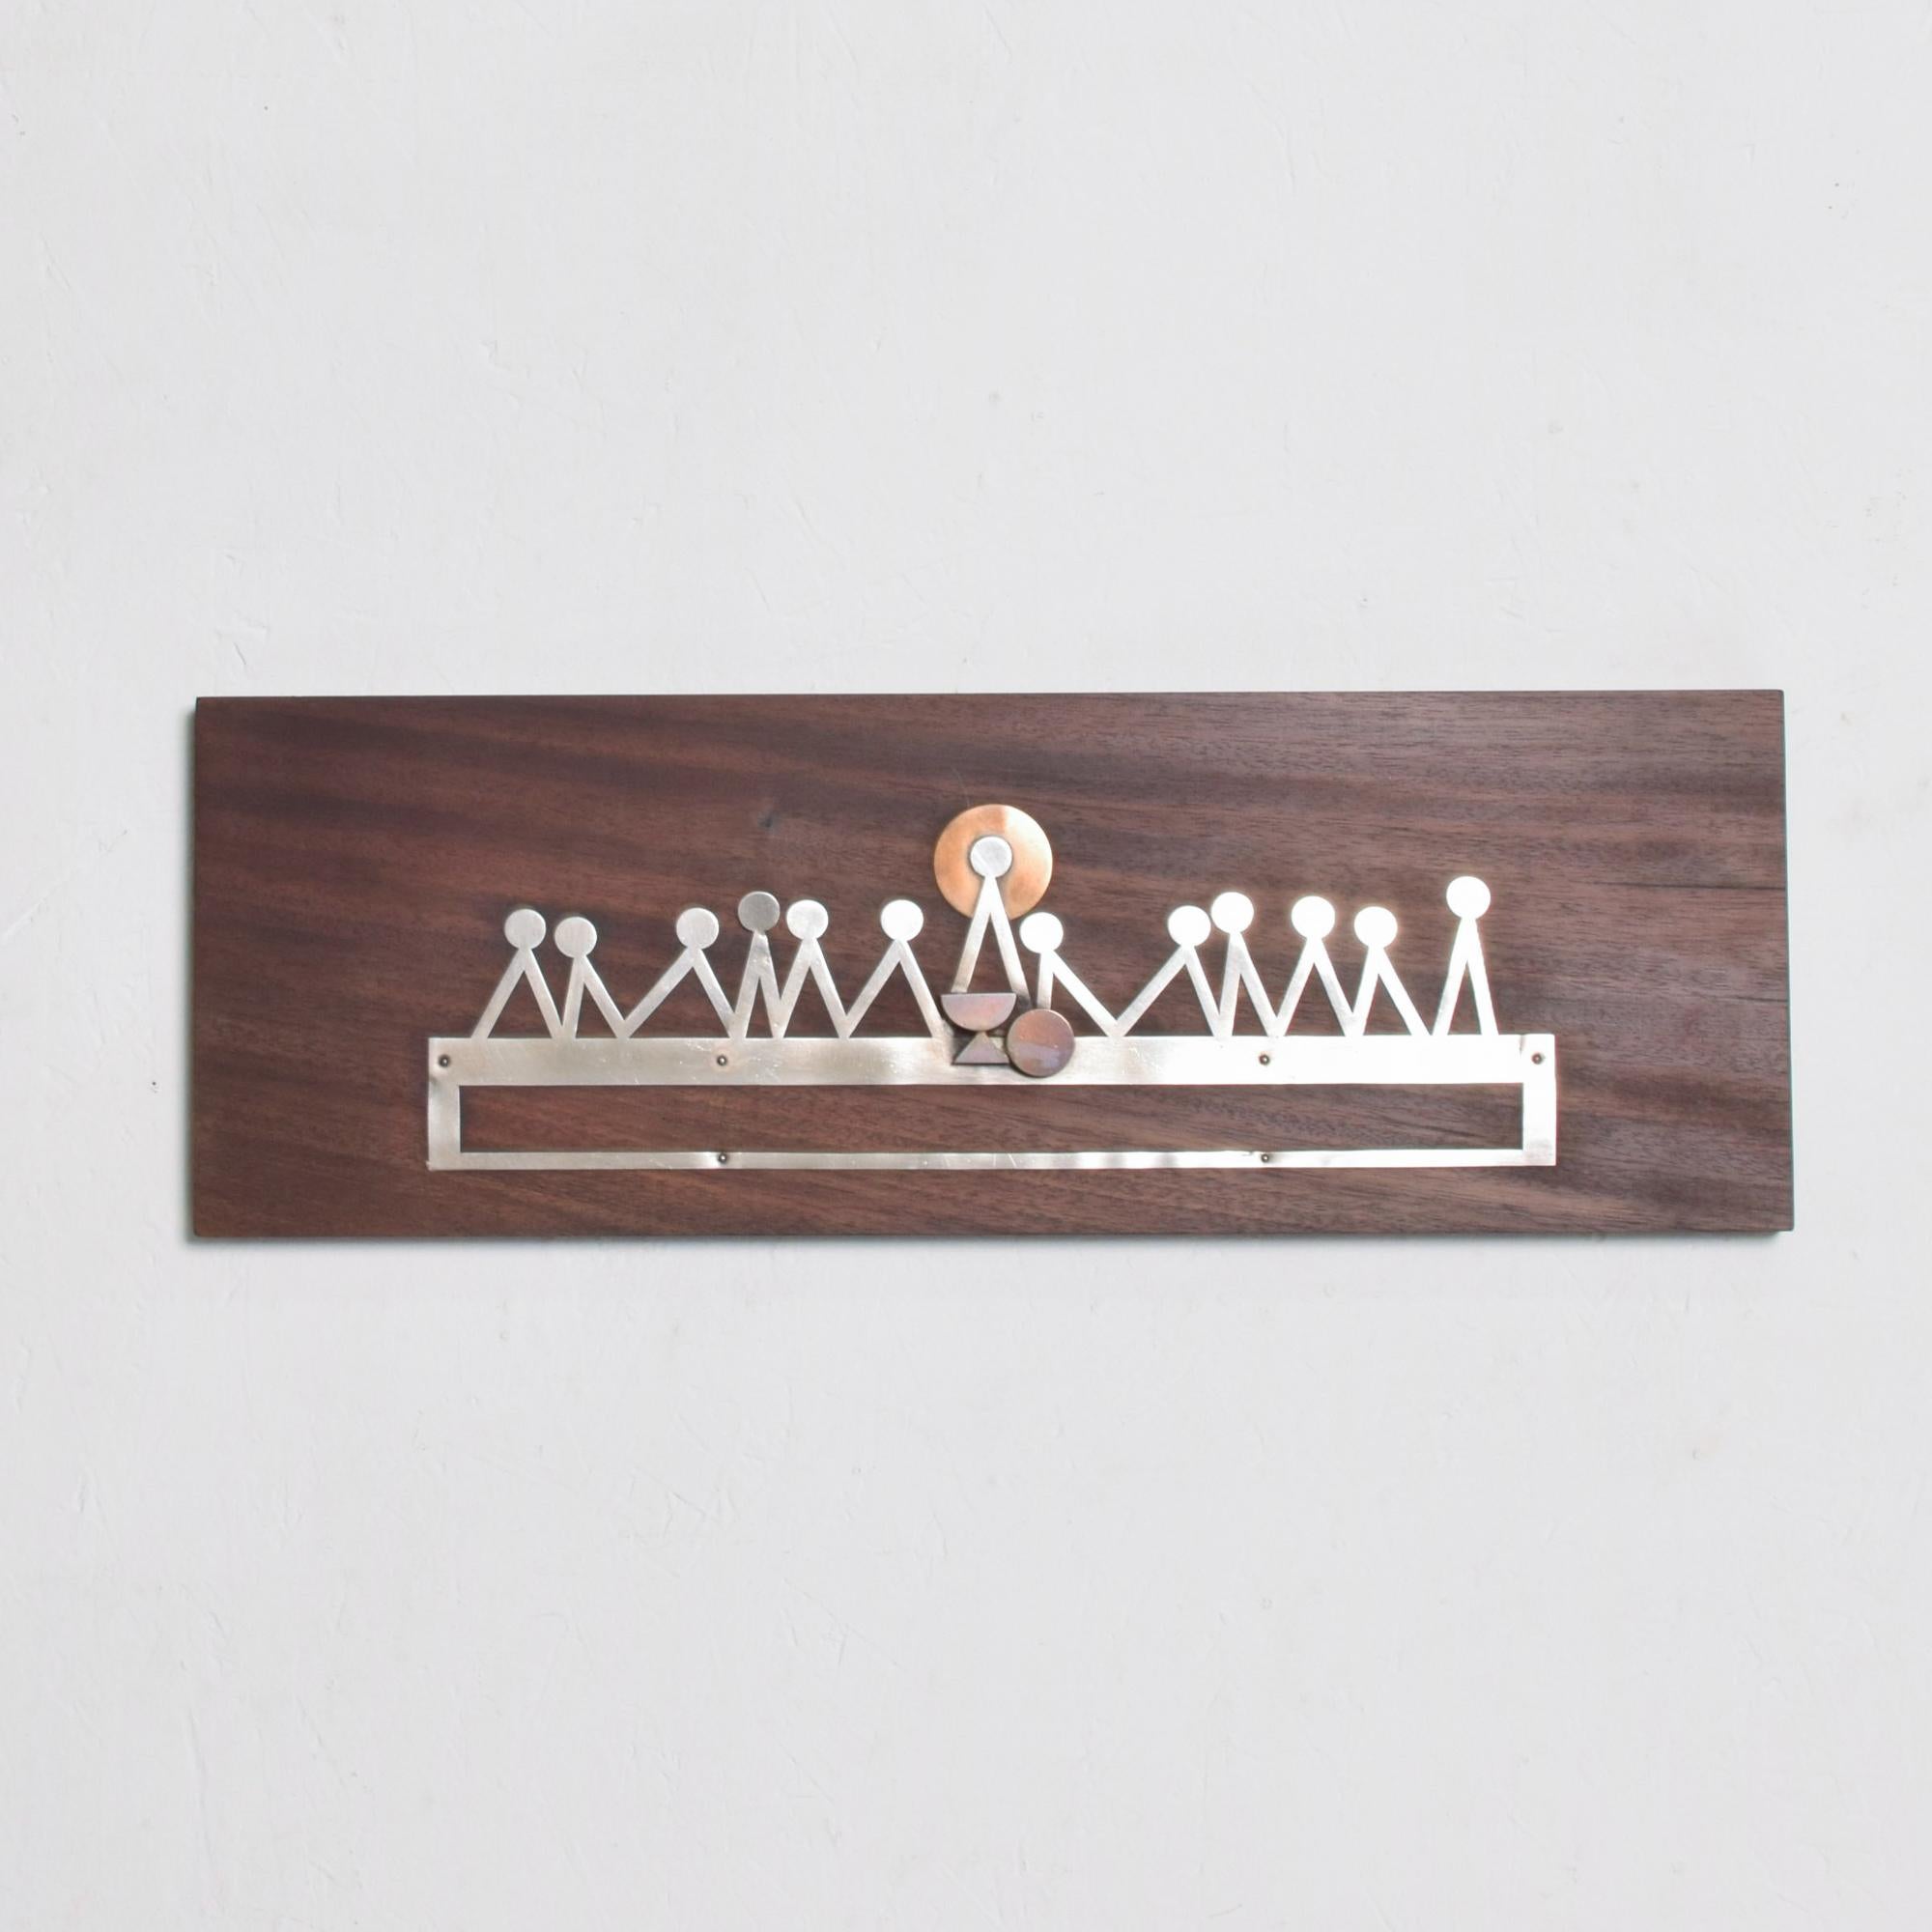 Presenting 1960s Mid-Century Modern large last supper abstract wall sculpture modernist plaque by Emaus Benedictine Monks of Cuernavaca, Mexico

In rich solid warm mahogany wood with mixed metals sterling silver and brass detailing.

Measures: